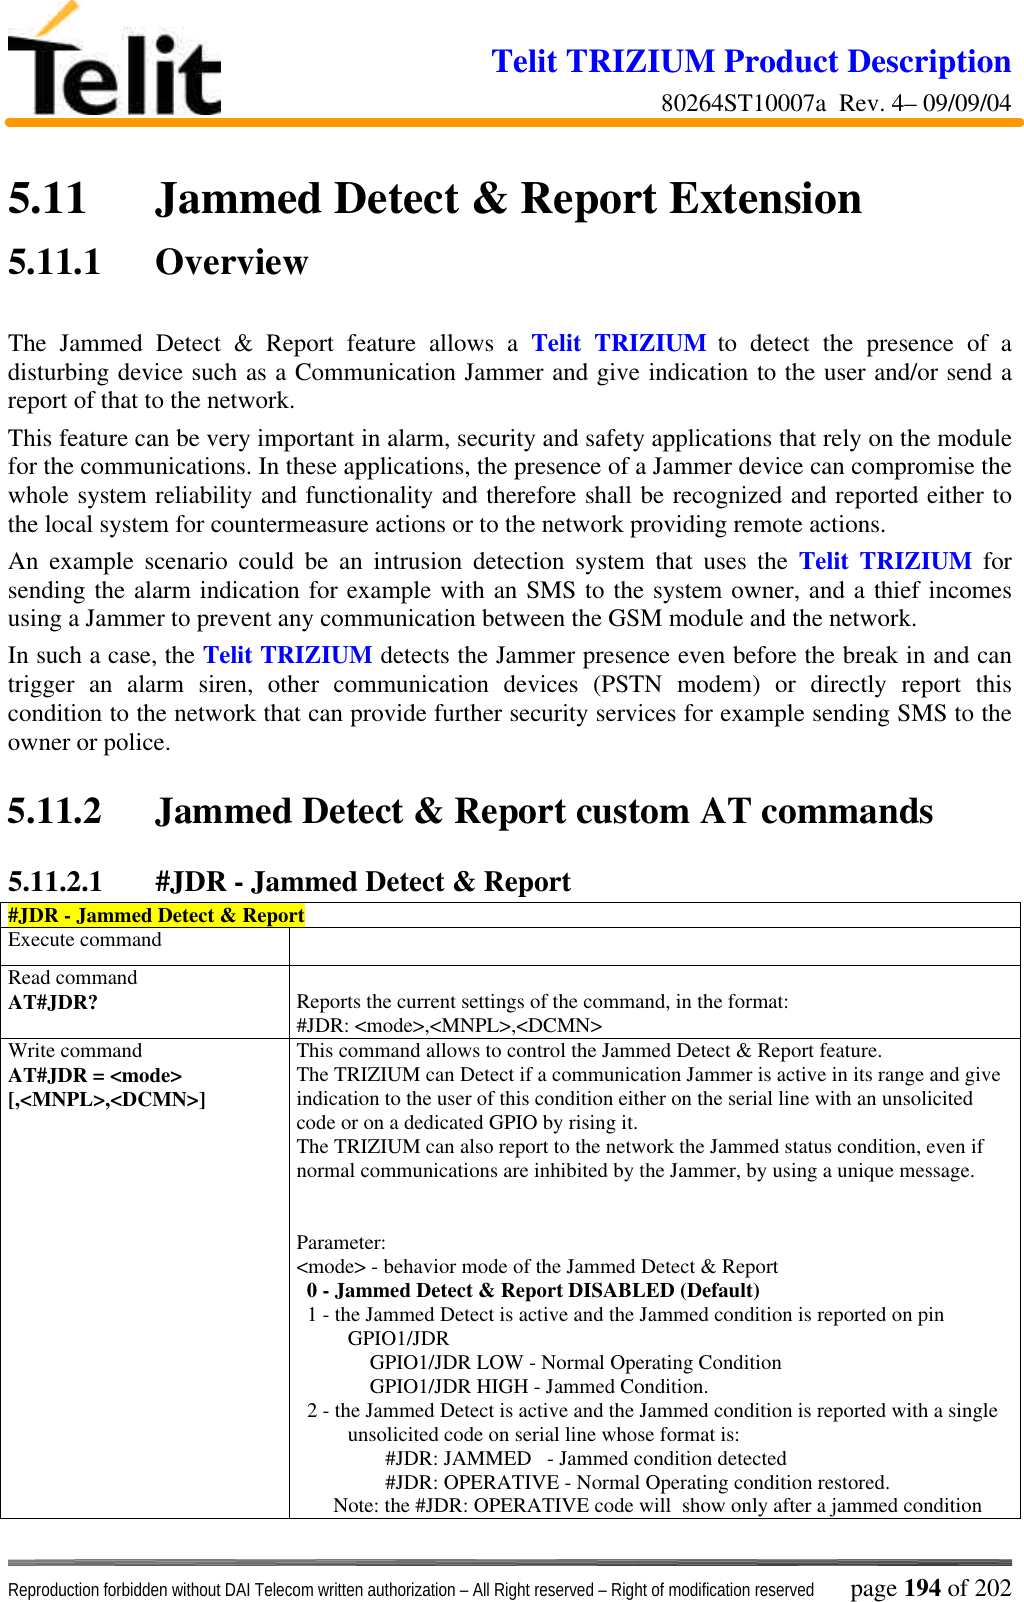 Telit TRIZIUM Product Description80264ST10007a  Rev. 4– 09/09/04Reproduction forbidden without DAI Telecom written authorization – All Right reserved – Right of modification reserved page 194 of 2025.11 Jammed Detect &amp; Report Extension5.11.1 OverviewThe Jammed Detect &amp; Report feature allows a Telit TRIZIUM to detect the presence of adisturbing device such as a Communication Jammer and give indication to the user and/or send areport of that to the network.This feature can be very important in alarm, security and safety applications that rely on the modulefor the communications. In these applications, the presence of a Jammer device can compromise thewhole system reliability and functionality and therefore shall be recognized and reported either tothe local system for countermeasure actions or to the network providing remote actions.An example scenario could be an intrusion detection system that uses the Telit TRIZIUM forsending the alarm indication for example with an SMS to the system owner, and a thief incomesusing a Jammer to prevent any communication between the GSM module and the network.In such a case, the Telit TRIZIUM detects the Jammer presence even before the break in and cantrigger an alarm siren, other communication devices (PSTN modem) or directly report thiscondition to the network that can provide further security services for example sending SMS to theowner or police.5.11.2 Jammed Detect &amp; Report custom AT commands5.11.2.1 #JDR - Jammed Detect &amp; Report#JDR - Jammed Detect &amp; ReportExecute commandRead commandAT#JDR? Reports the current settings of the command, in the format:#JDR: &lt;mode&gt;,&lt;MNPL&gt;,&lt;DCMN&gt;Write commandAT#JDR = &lt;mode&gt;[,&lt;MNPL&gt;,&lt;DCMN&gt;]This command allows to control the Jammed Detect &amp; Report feature.The TRIZIUM can Detect if a communication Jammer is active in its range and giveindication to the user of this condition either on the serial line with an unsolicitedcode or on a dedicated GPIO by rising it.The TRIZIUM can also report to the network the Jammed status condition, even ifnormal communications are inhibited by the Jammer, by using a unique message.Parameter:&lt;mode&gt; - behavior mode of the Jammed Detect &amp; Report  0 - Jammed Detect &amp; Report DISABLED (Default)  1 - the Jammed Detect is active and the Jammed condition is reported on pinGPIO1/JDR              GPIO1/JDR LOW - Normal Operating Condition              GPIO1/JDR HIGH - Jammed Condition.  2 - the Jammed Detect is active and the Jammed condition is reported with a singleunsolicited code on serial line whose format is:                 #JDR: JAMMED   - Jammed condition detected                 #JDR: OPERATIVE - Normal Operating condition restored.       Note: the #JDR: OPERATIVE code will  show only after a jammed condition